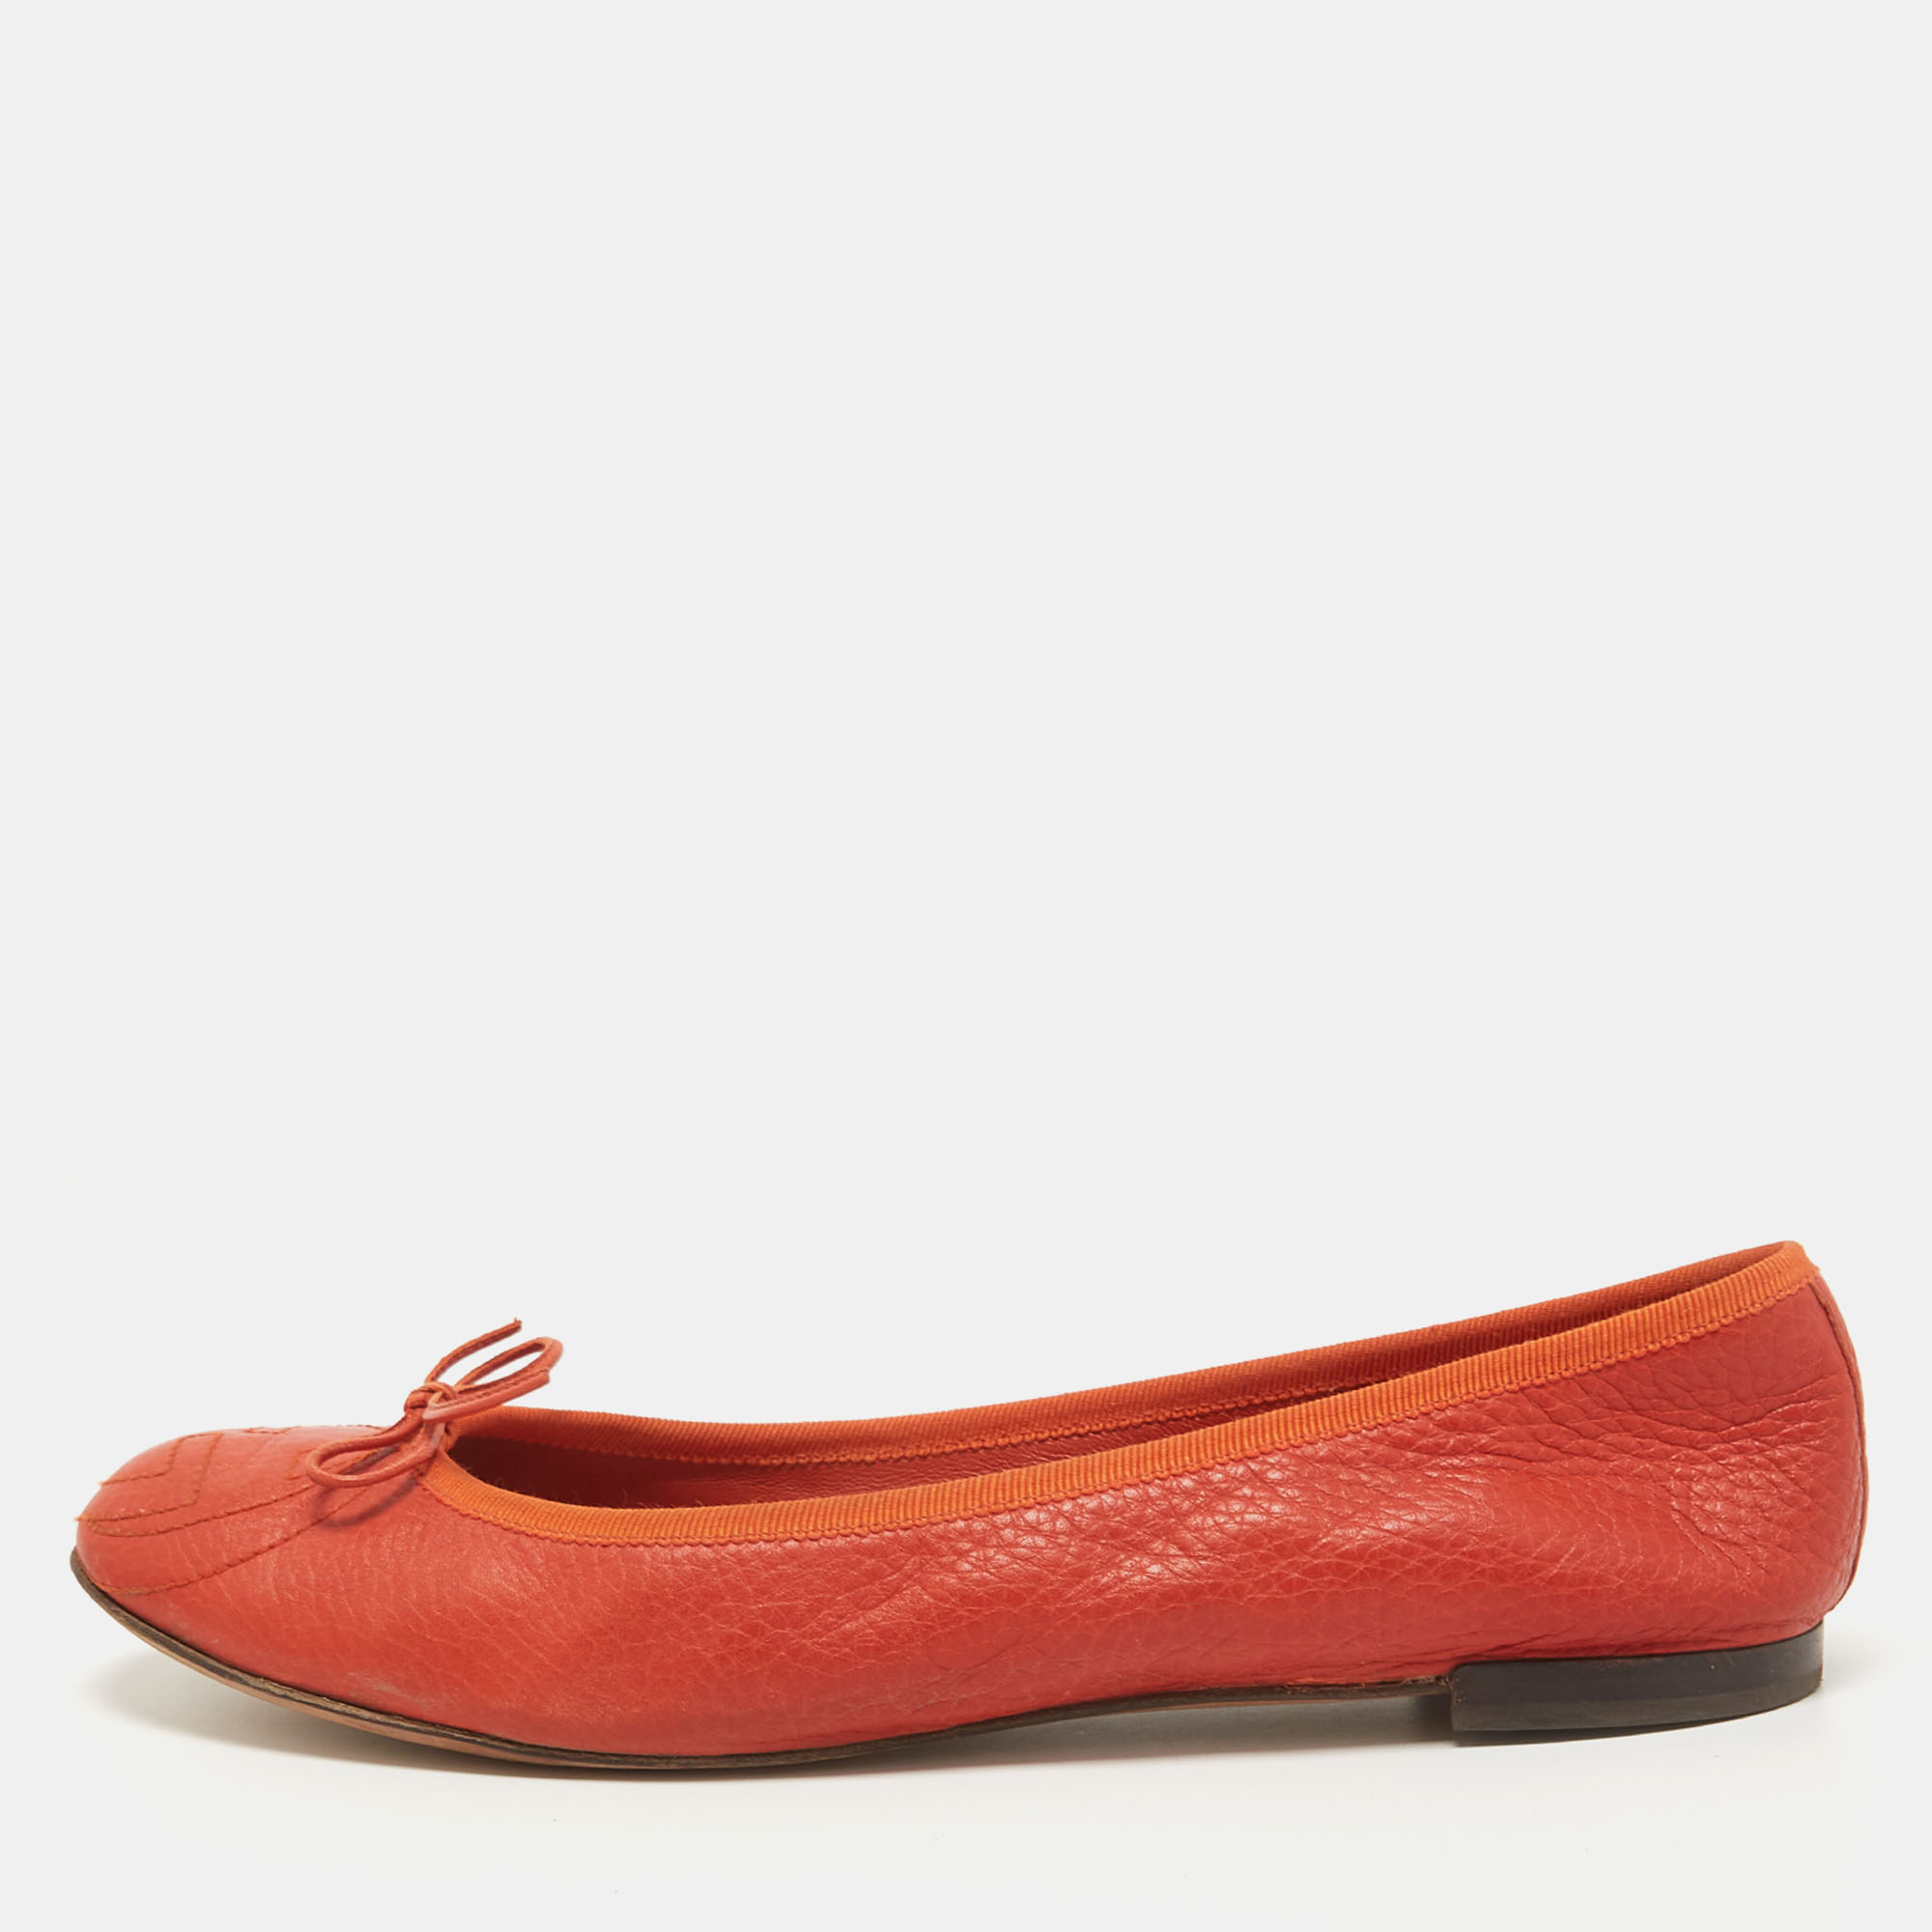 Pre-owned Gucci Orange Leather Bow Ballet Flats Size 39.5